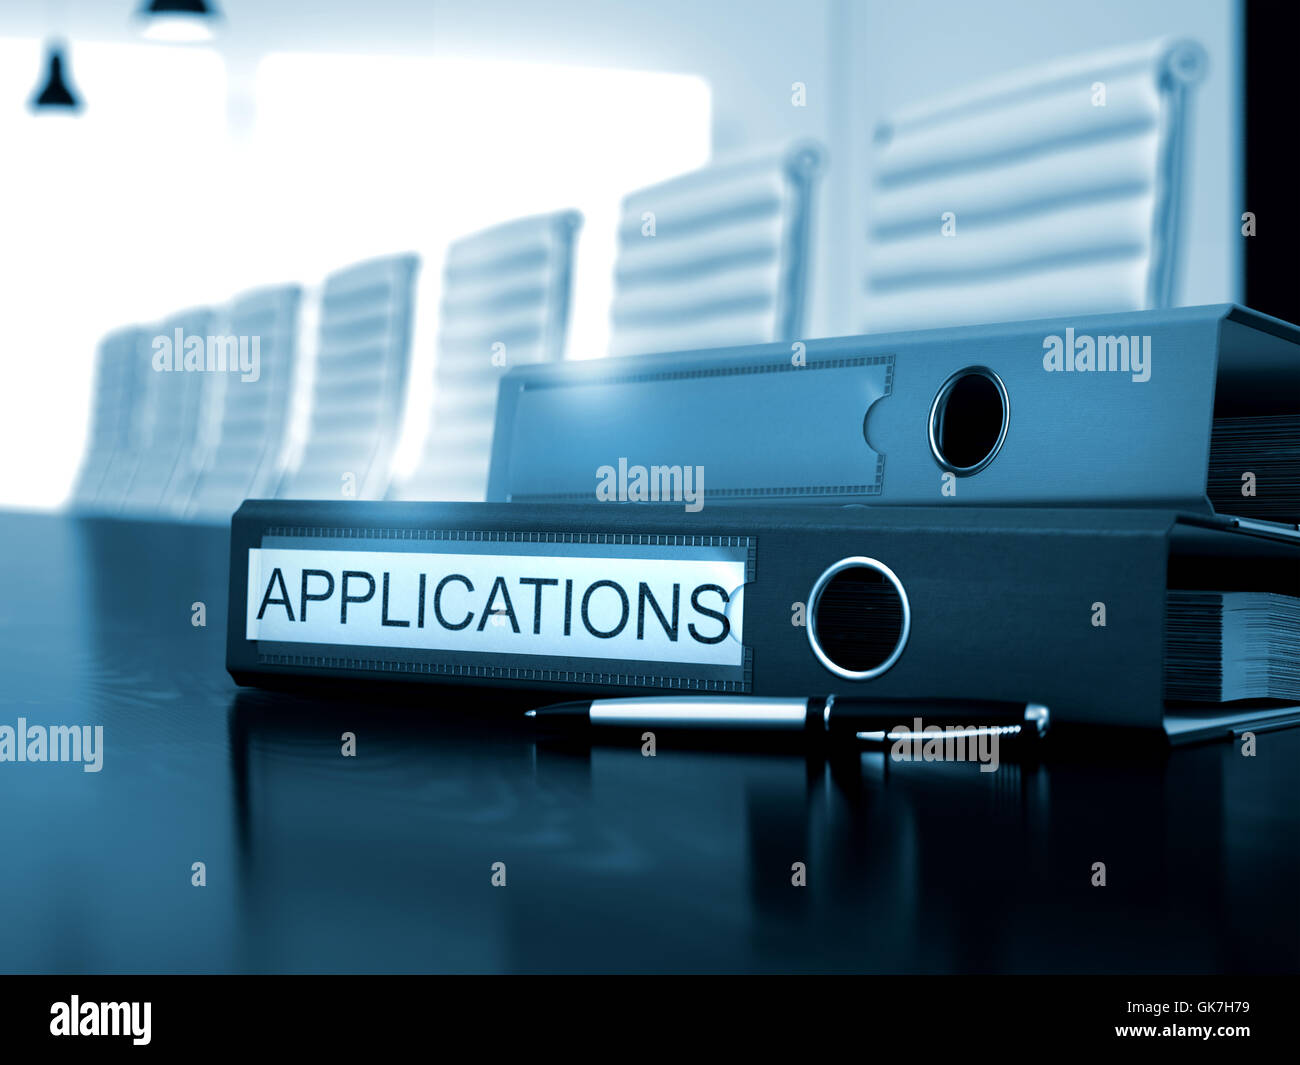 Applications on Office Folder. Blurred Image. Stock Photo